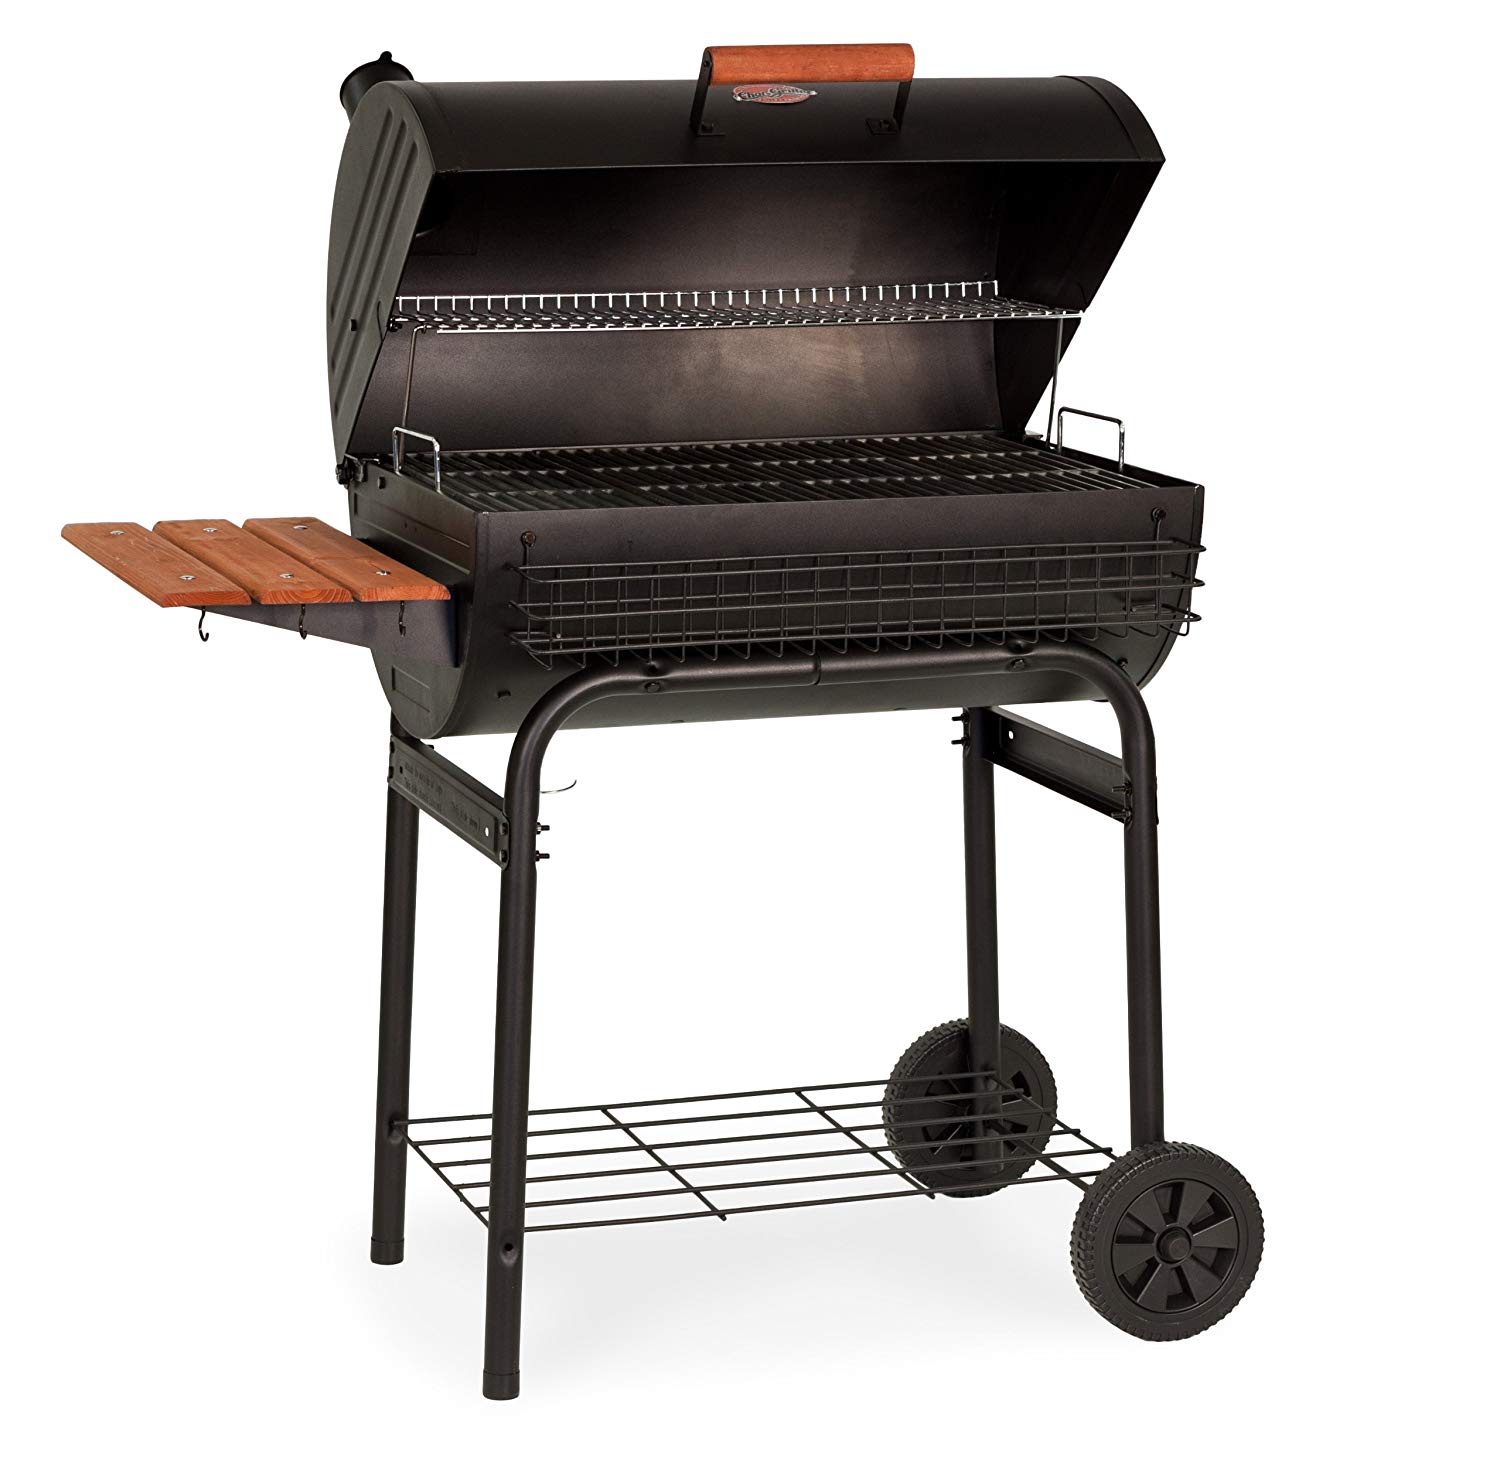 BBQ Grill And Smoker - Buy Electric, Charcoal and Propane Grills At Best Prices